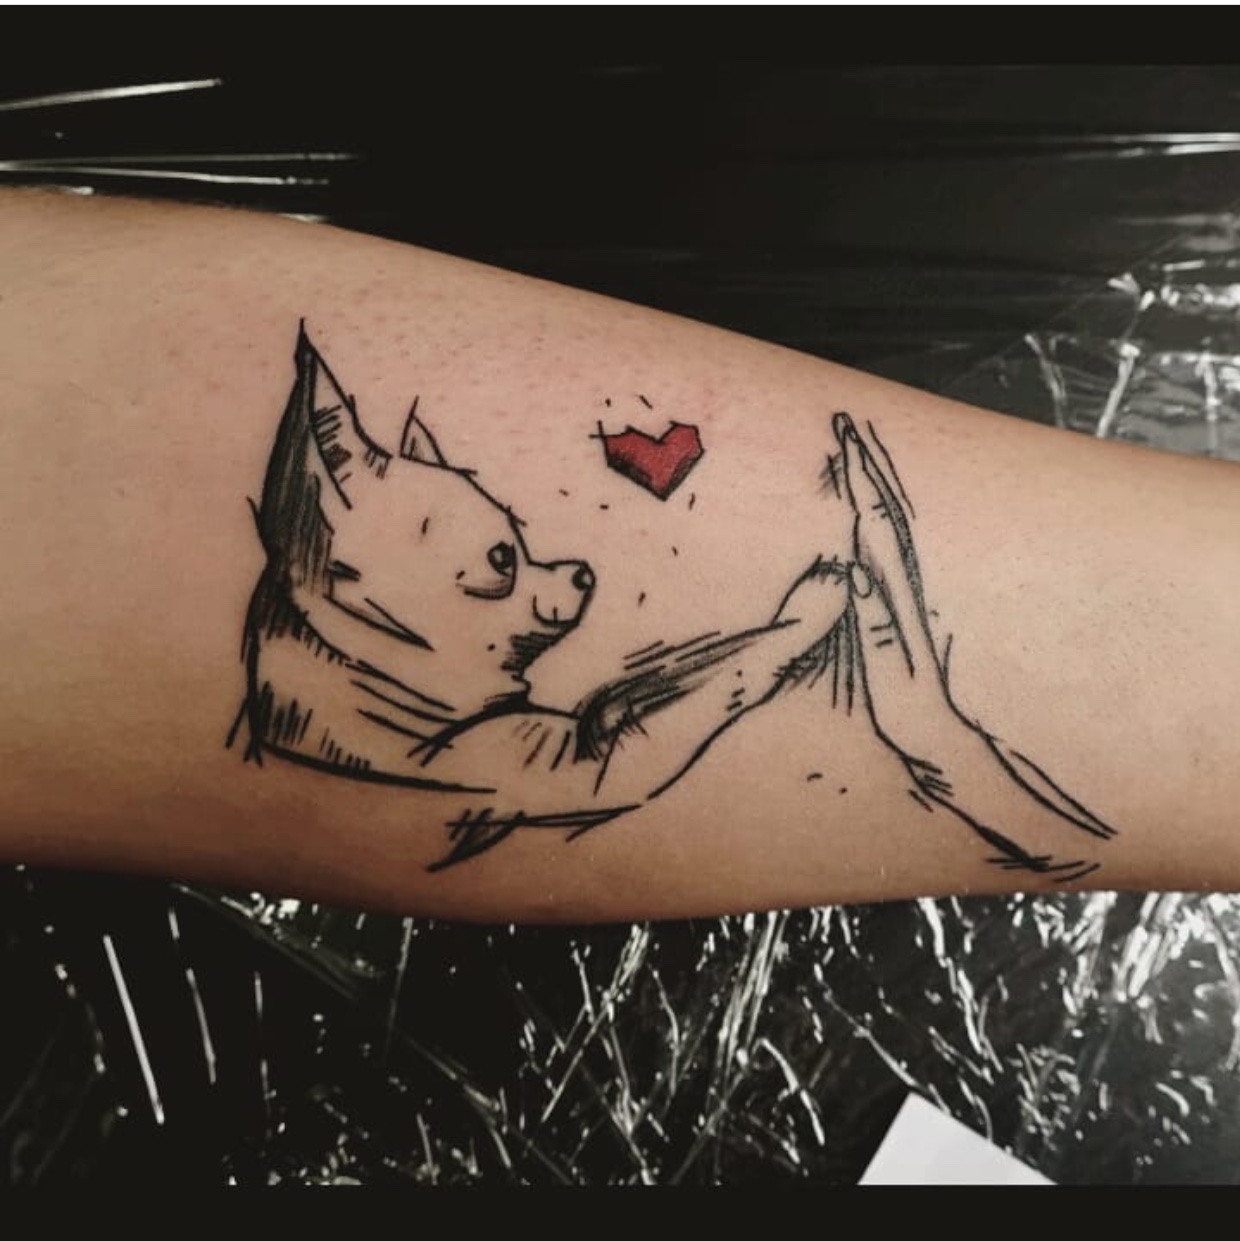 Chihuahua giving a high five tattoo on the forearm